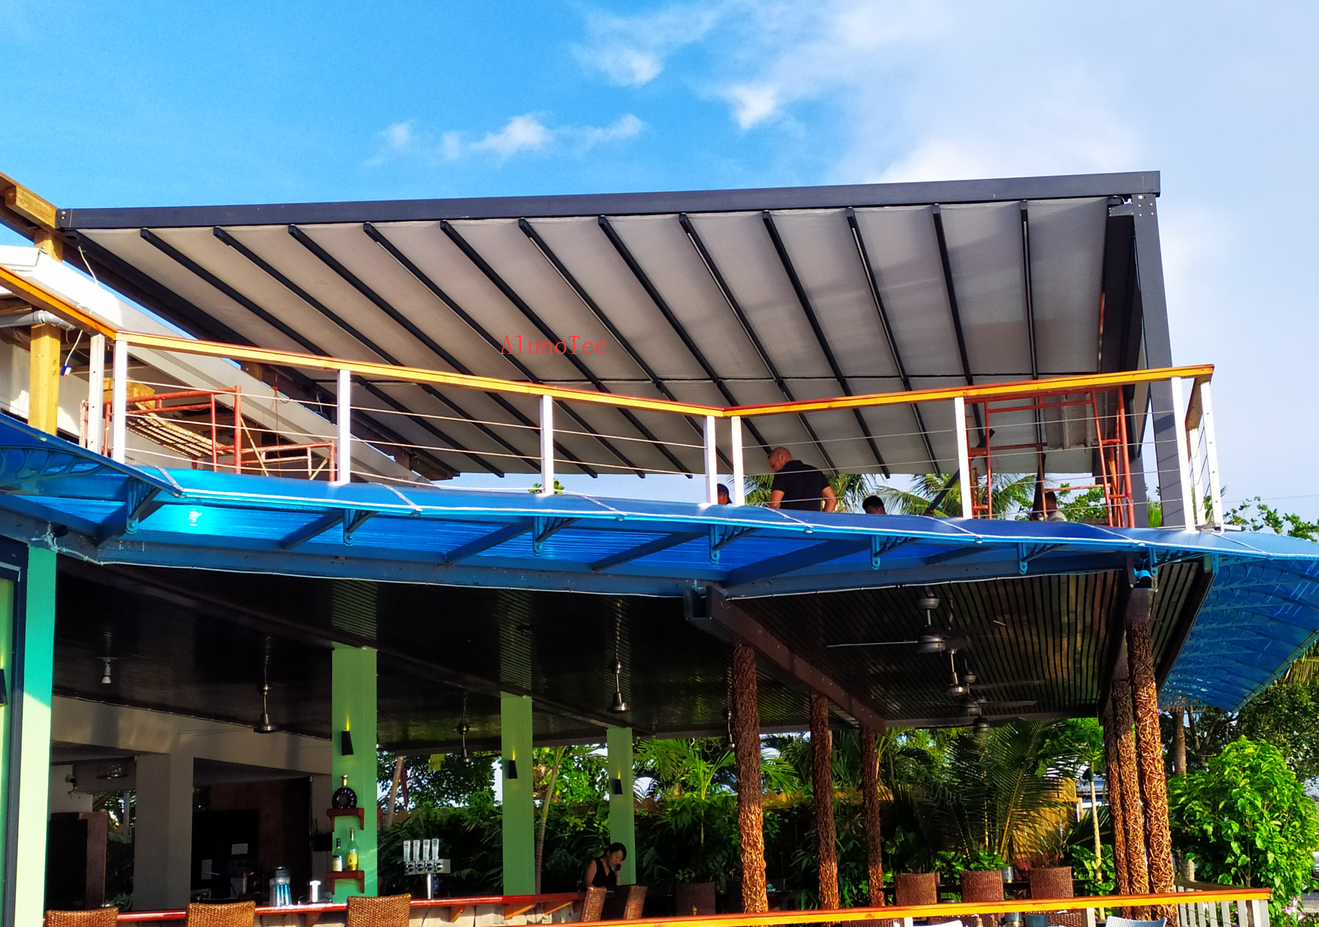 Motorized Retractable Awning For Outdoor Restaurant- Project From Palau